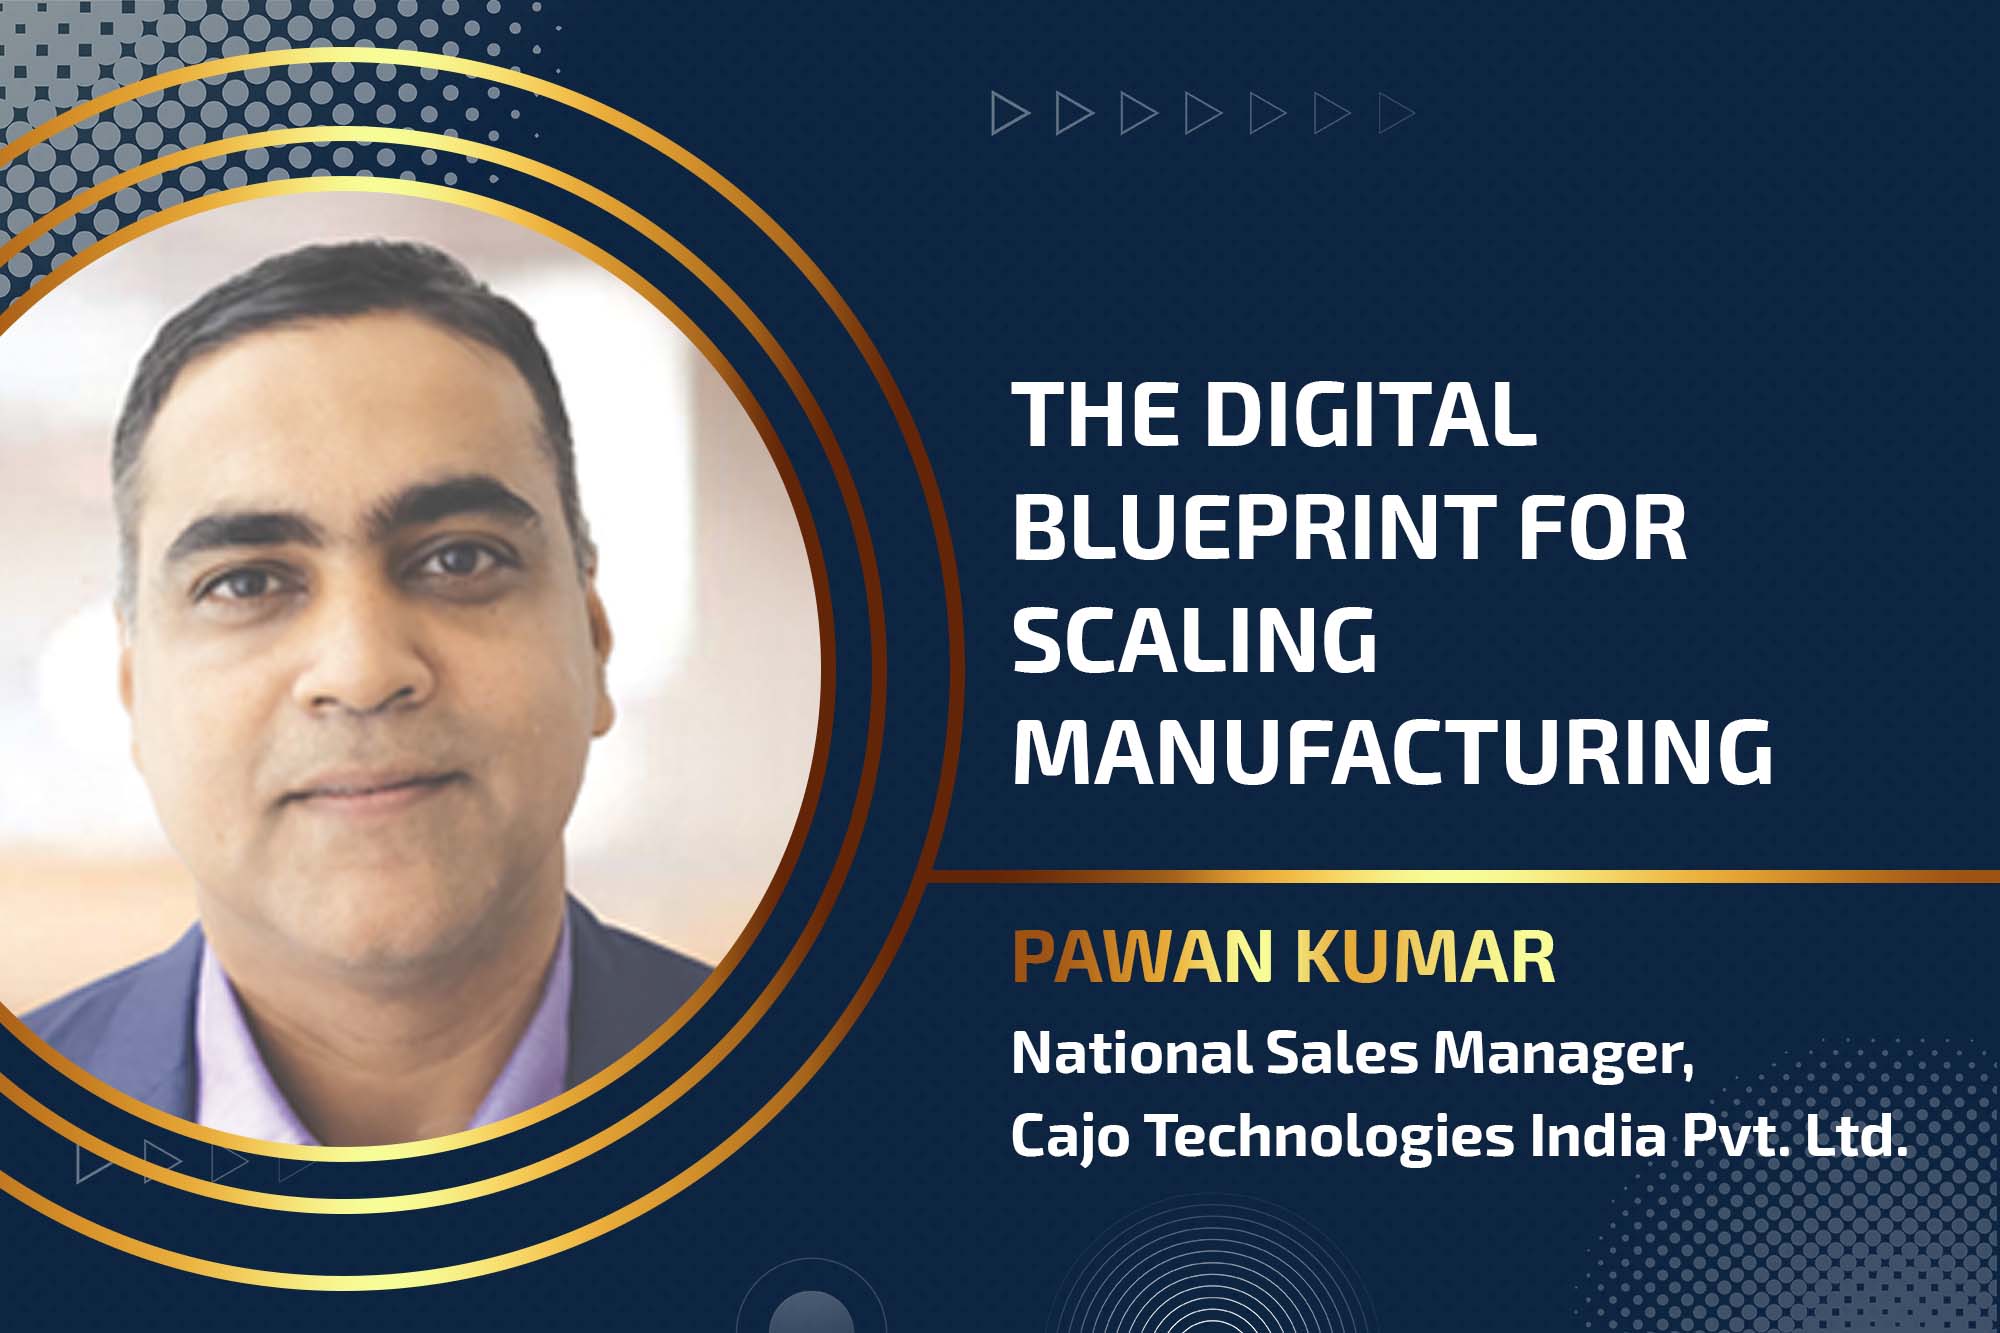 The digital blueprint for scaling manufacturing